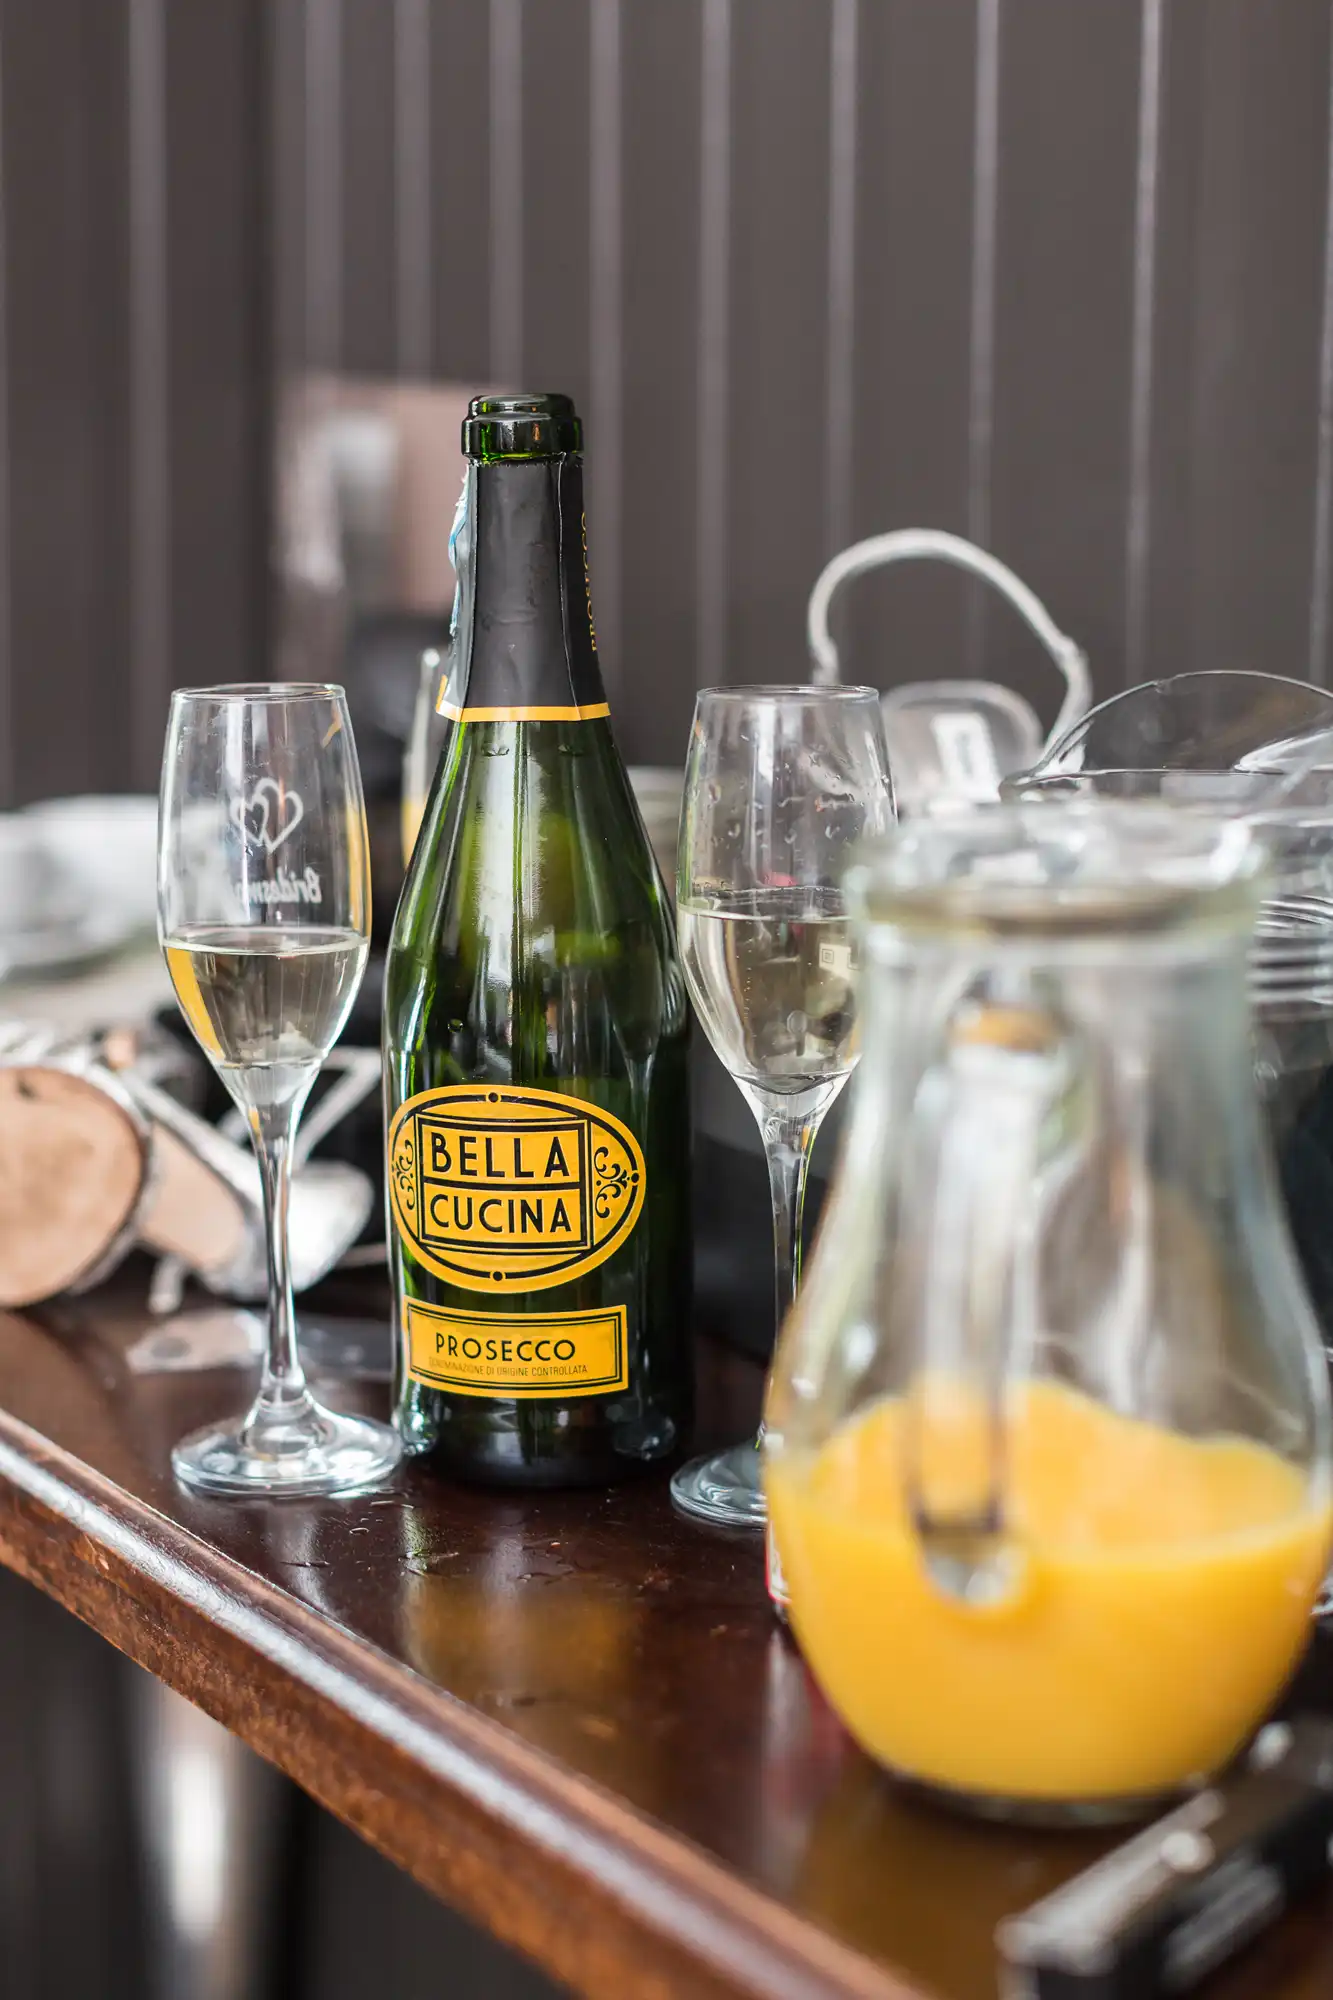 A bottle of bella cucina prosecco with two champagne glasses and a pitcher of orange juice on a wooden table.